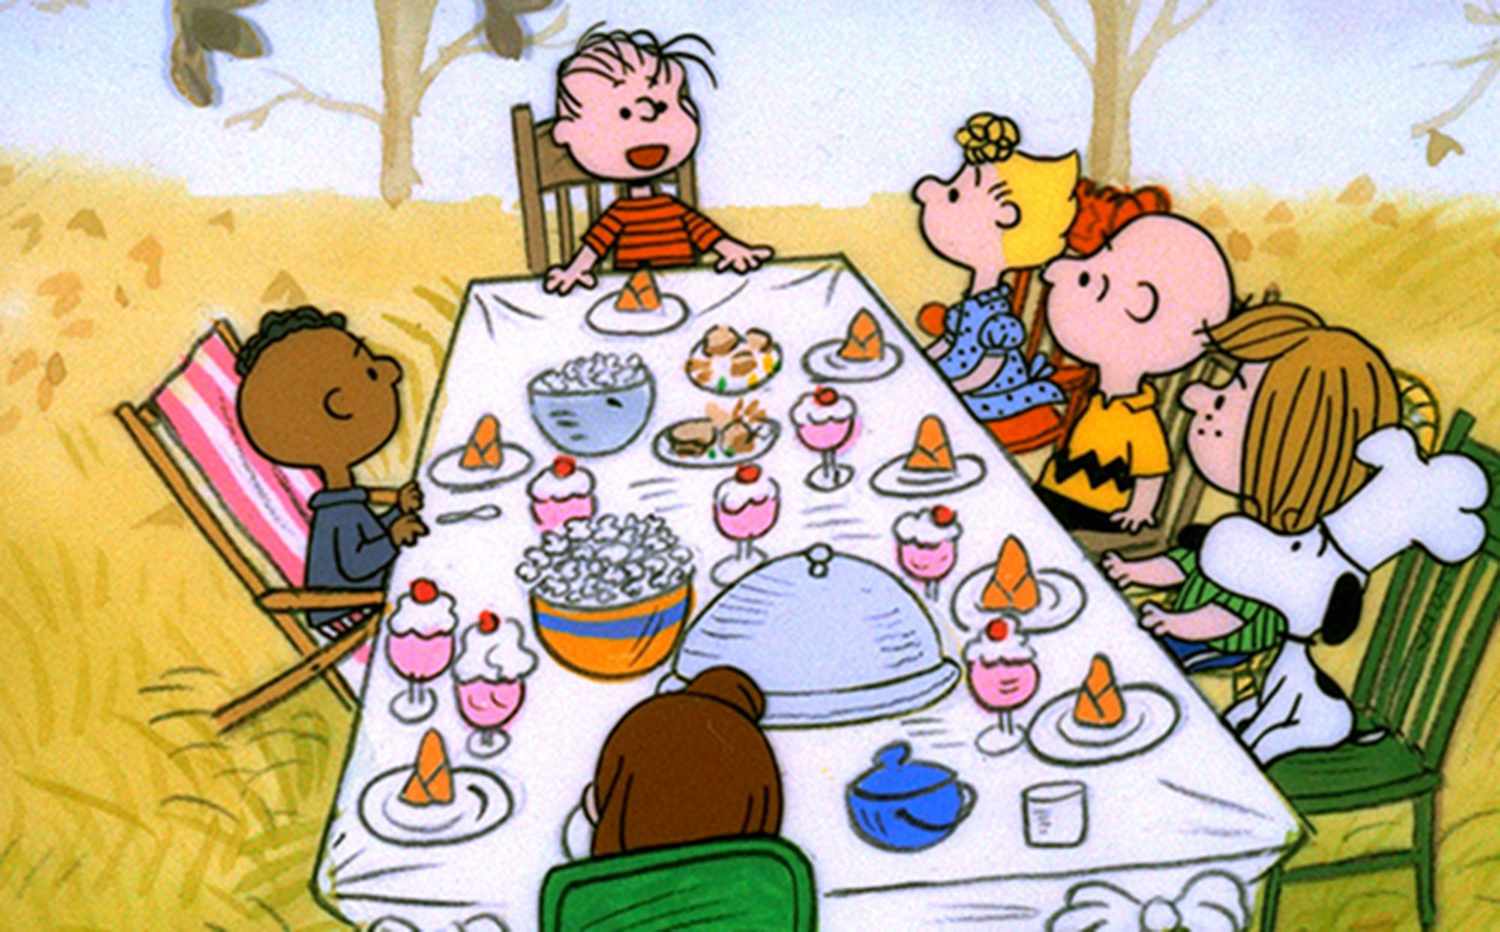 FRANKLIN, LINUS, SALLY, CHARLIE BROWN, PEPPERMINT PATTY, SNOOPY AND MARCIE